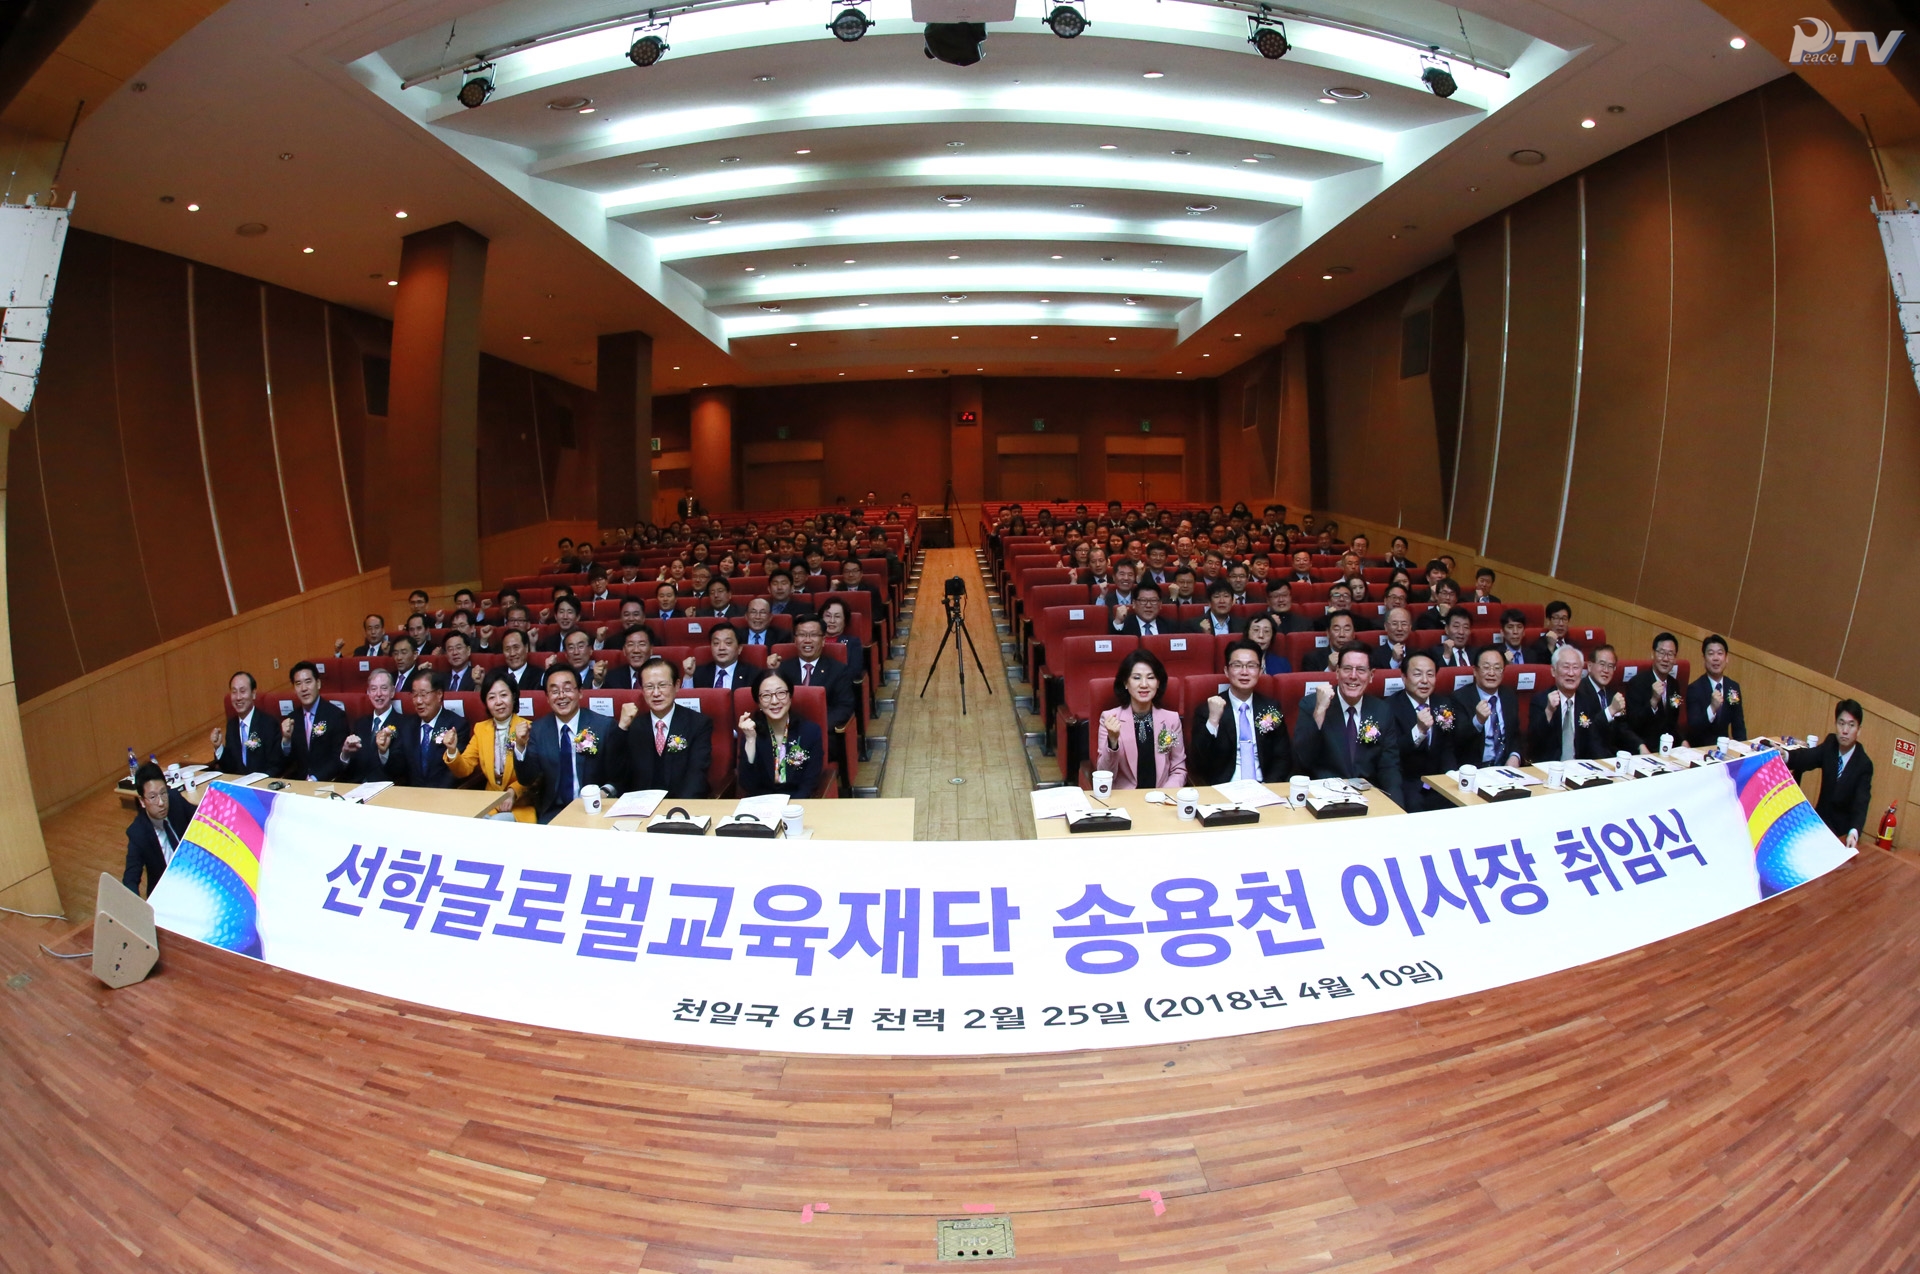 Inauguration of Song Yong-cheon as Chairman of the Sunhak Global Education Foundation (April 10, 2018)